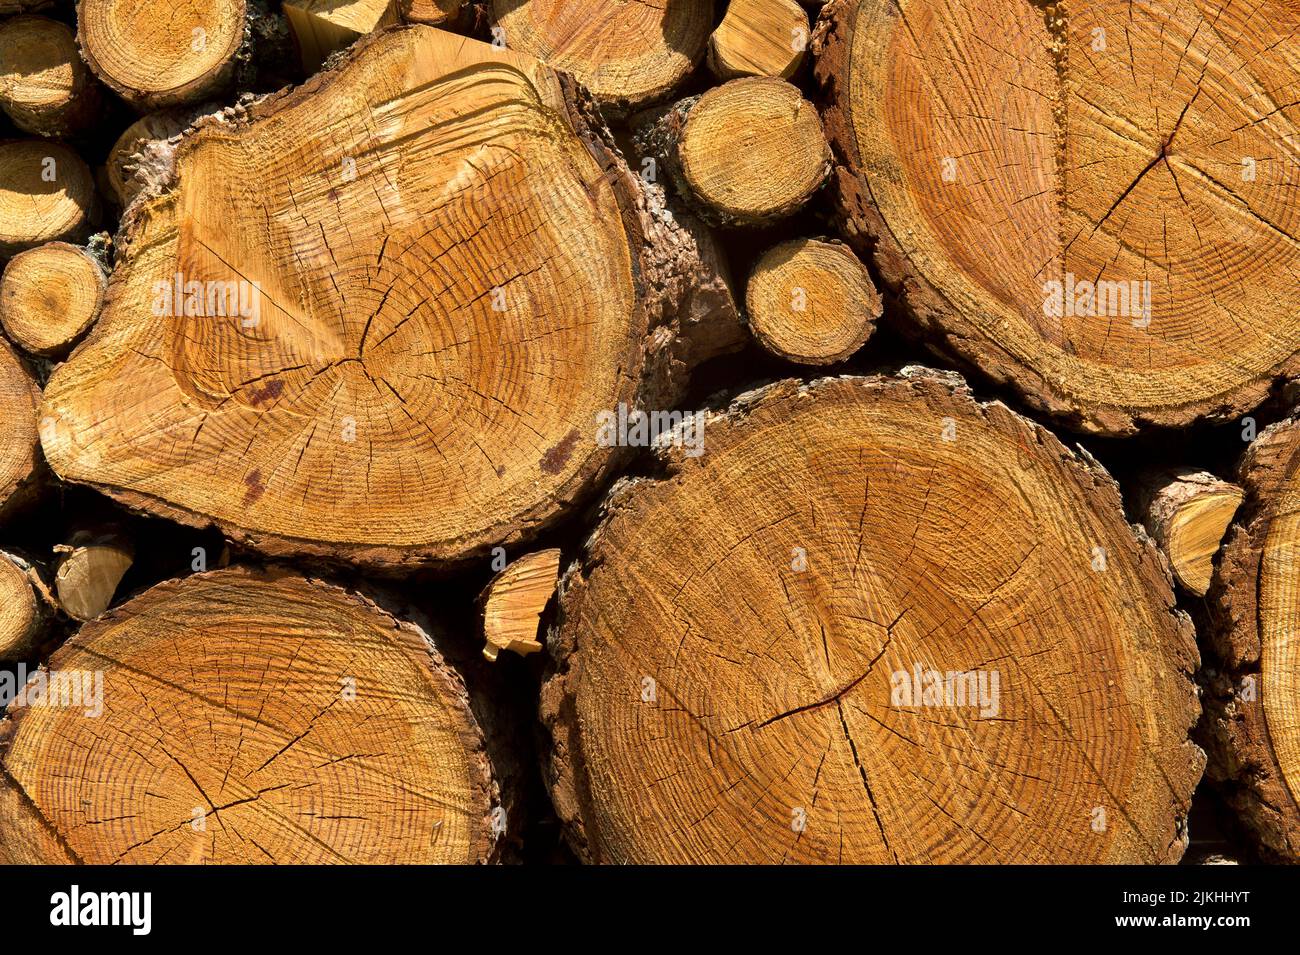 Stacked firewood from larch trees with different diameters of the branches and the tree trunks, Valais, Switzerland. Stock Photo